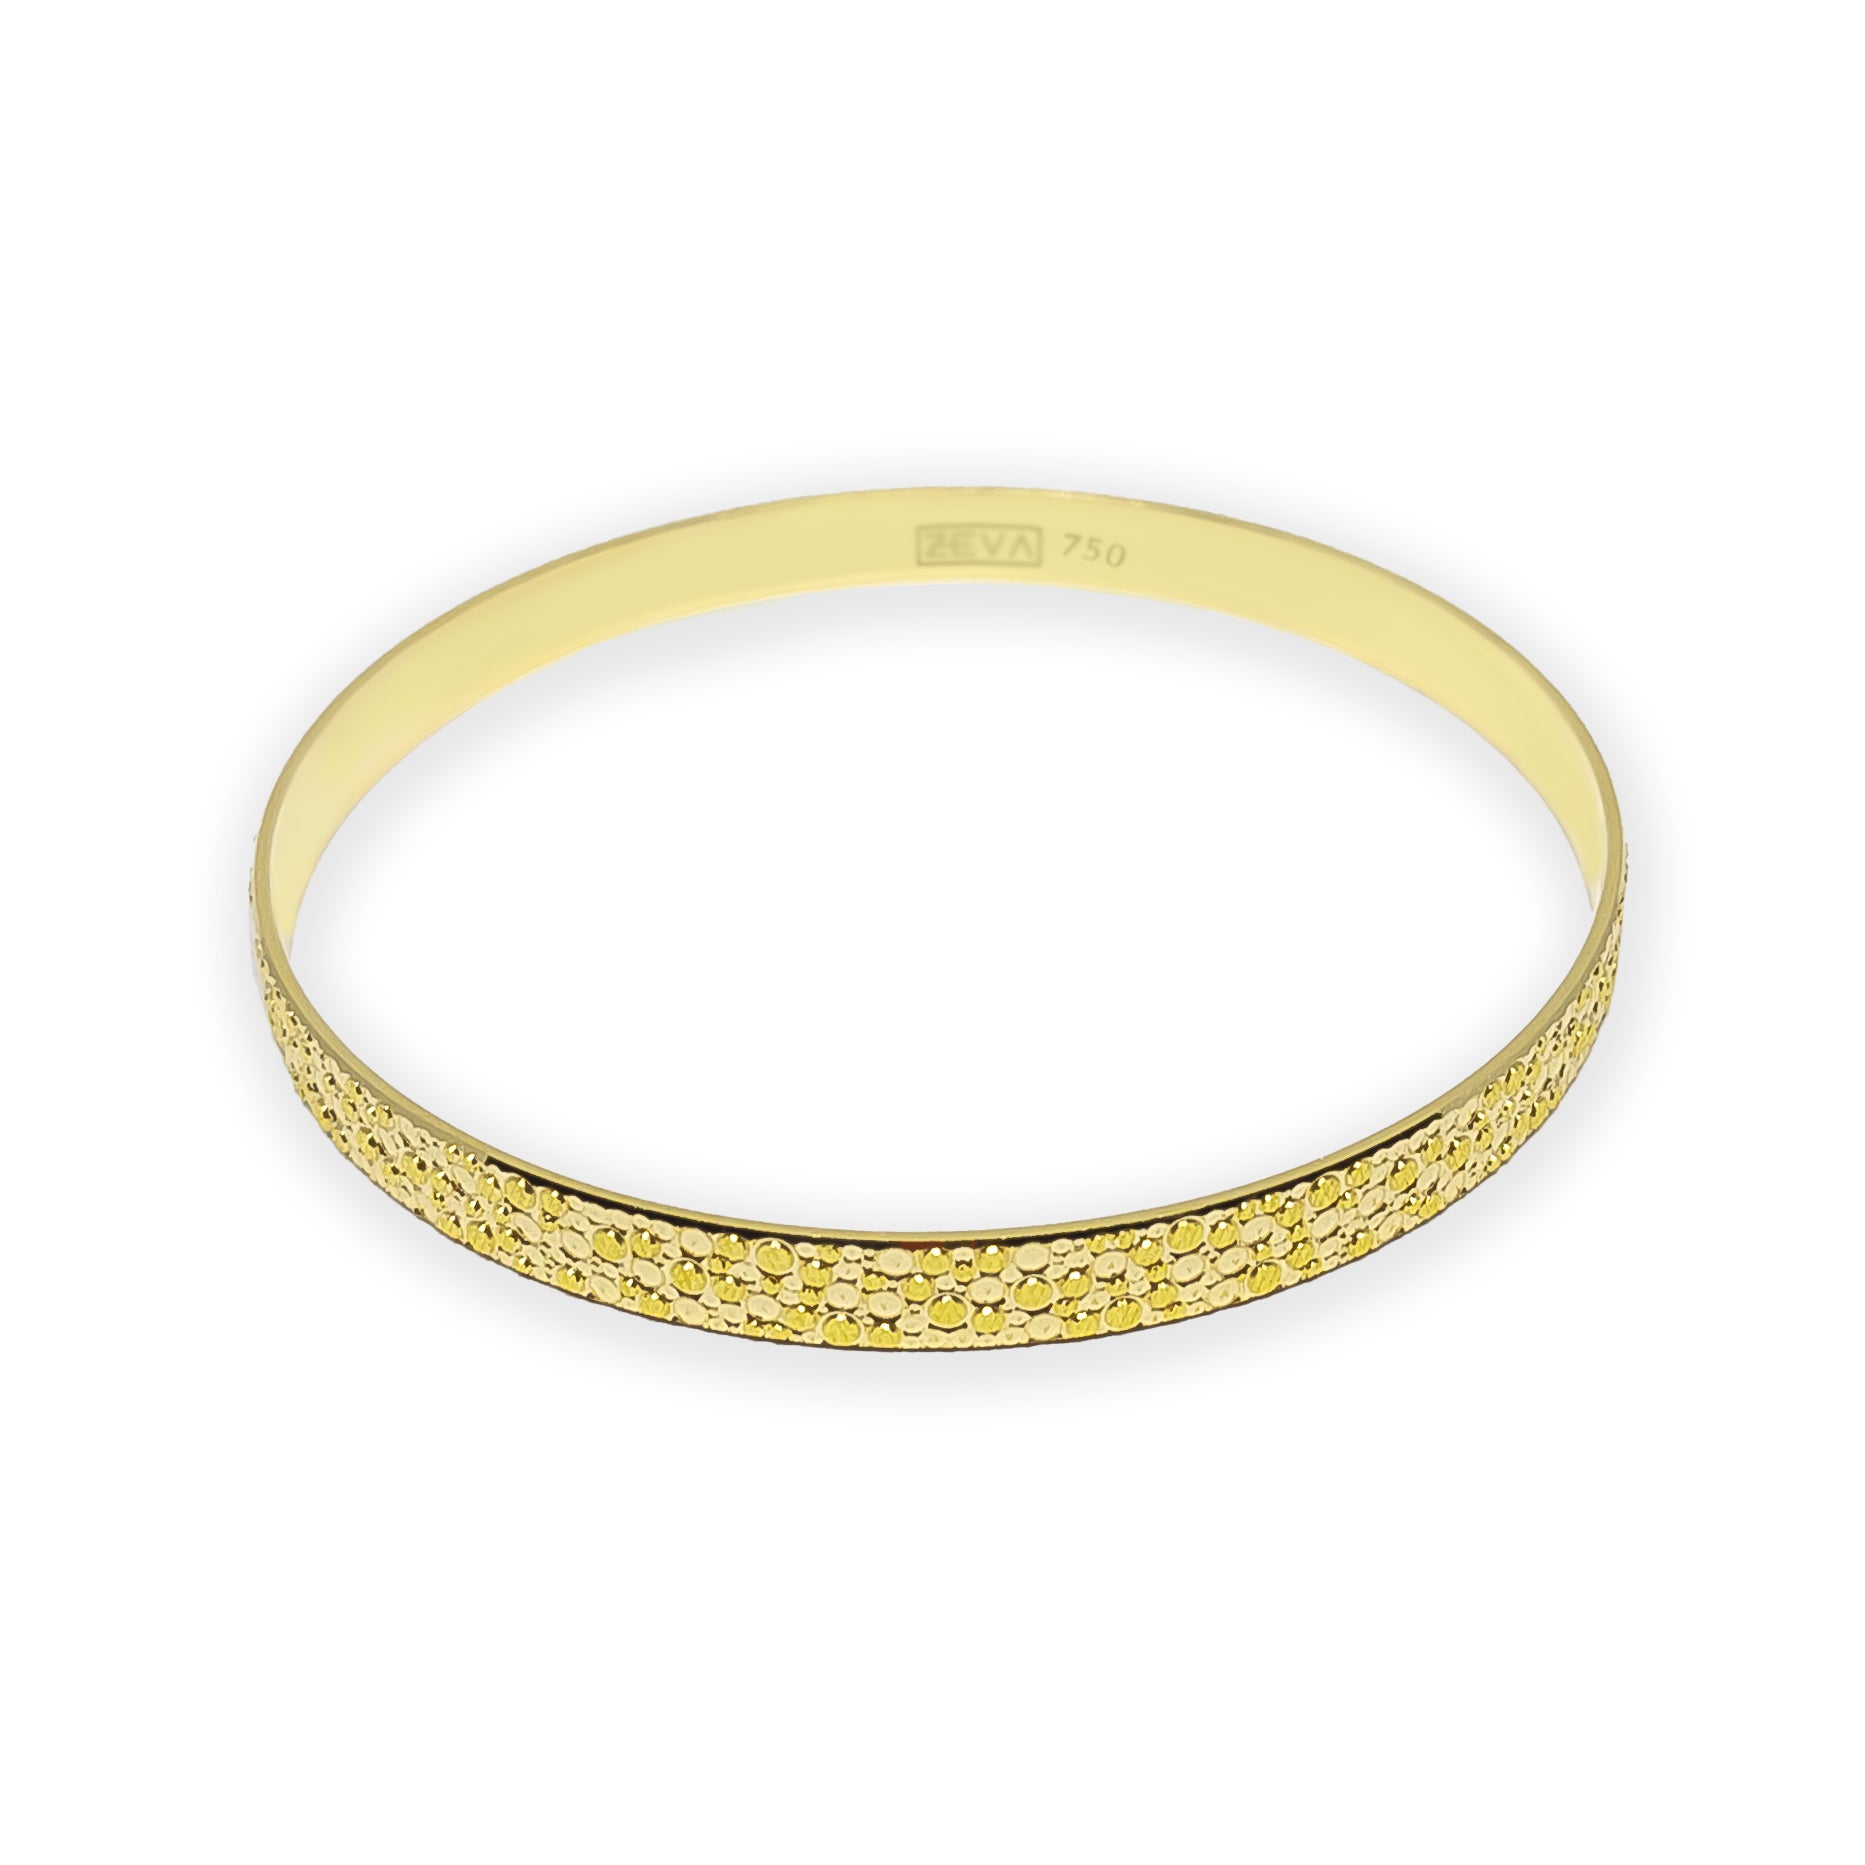 Bangle FROST 6mm yellow gold 18k 750